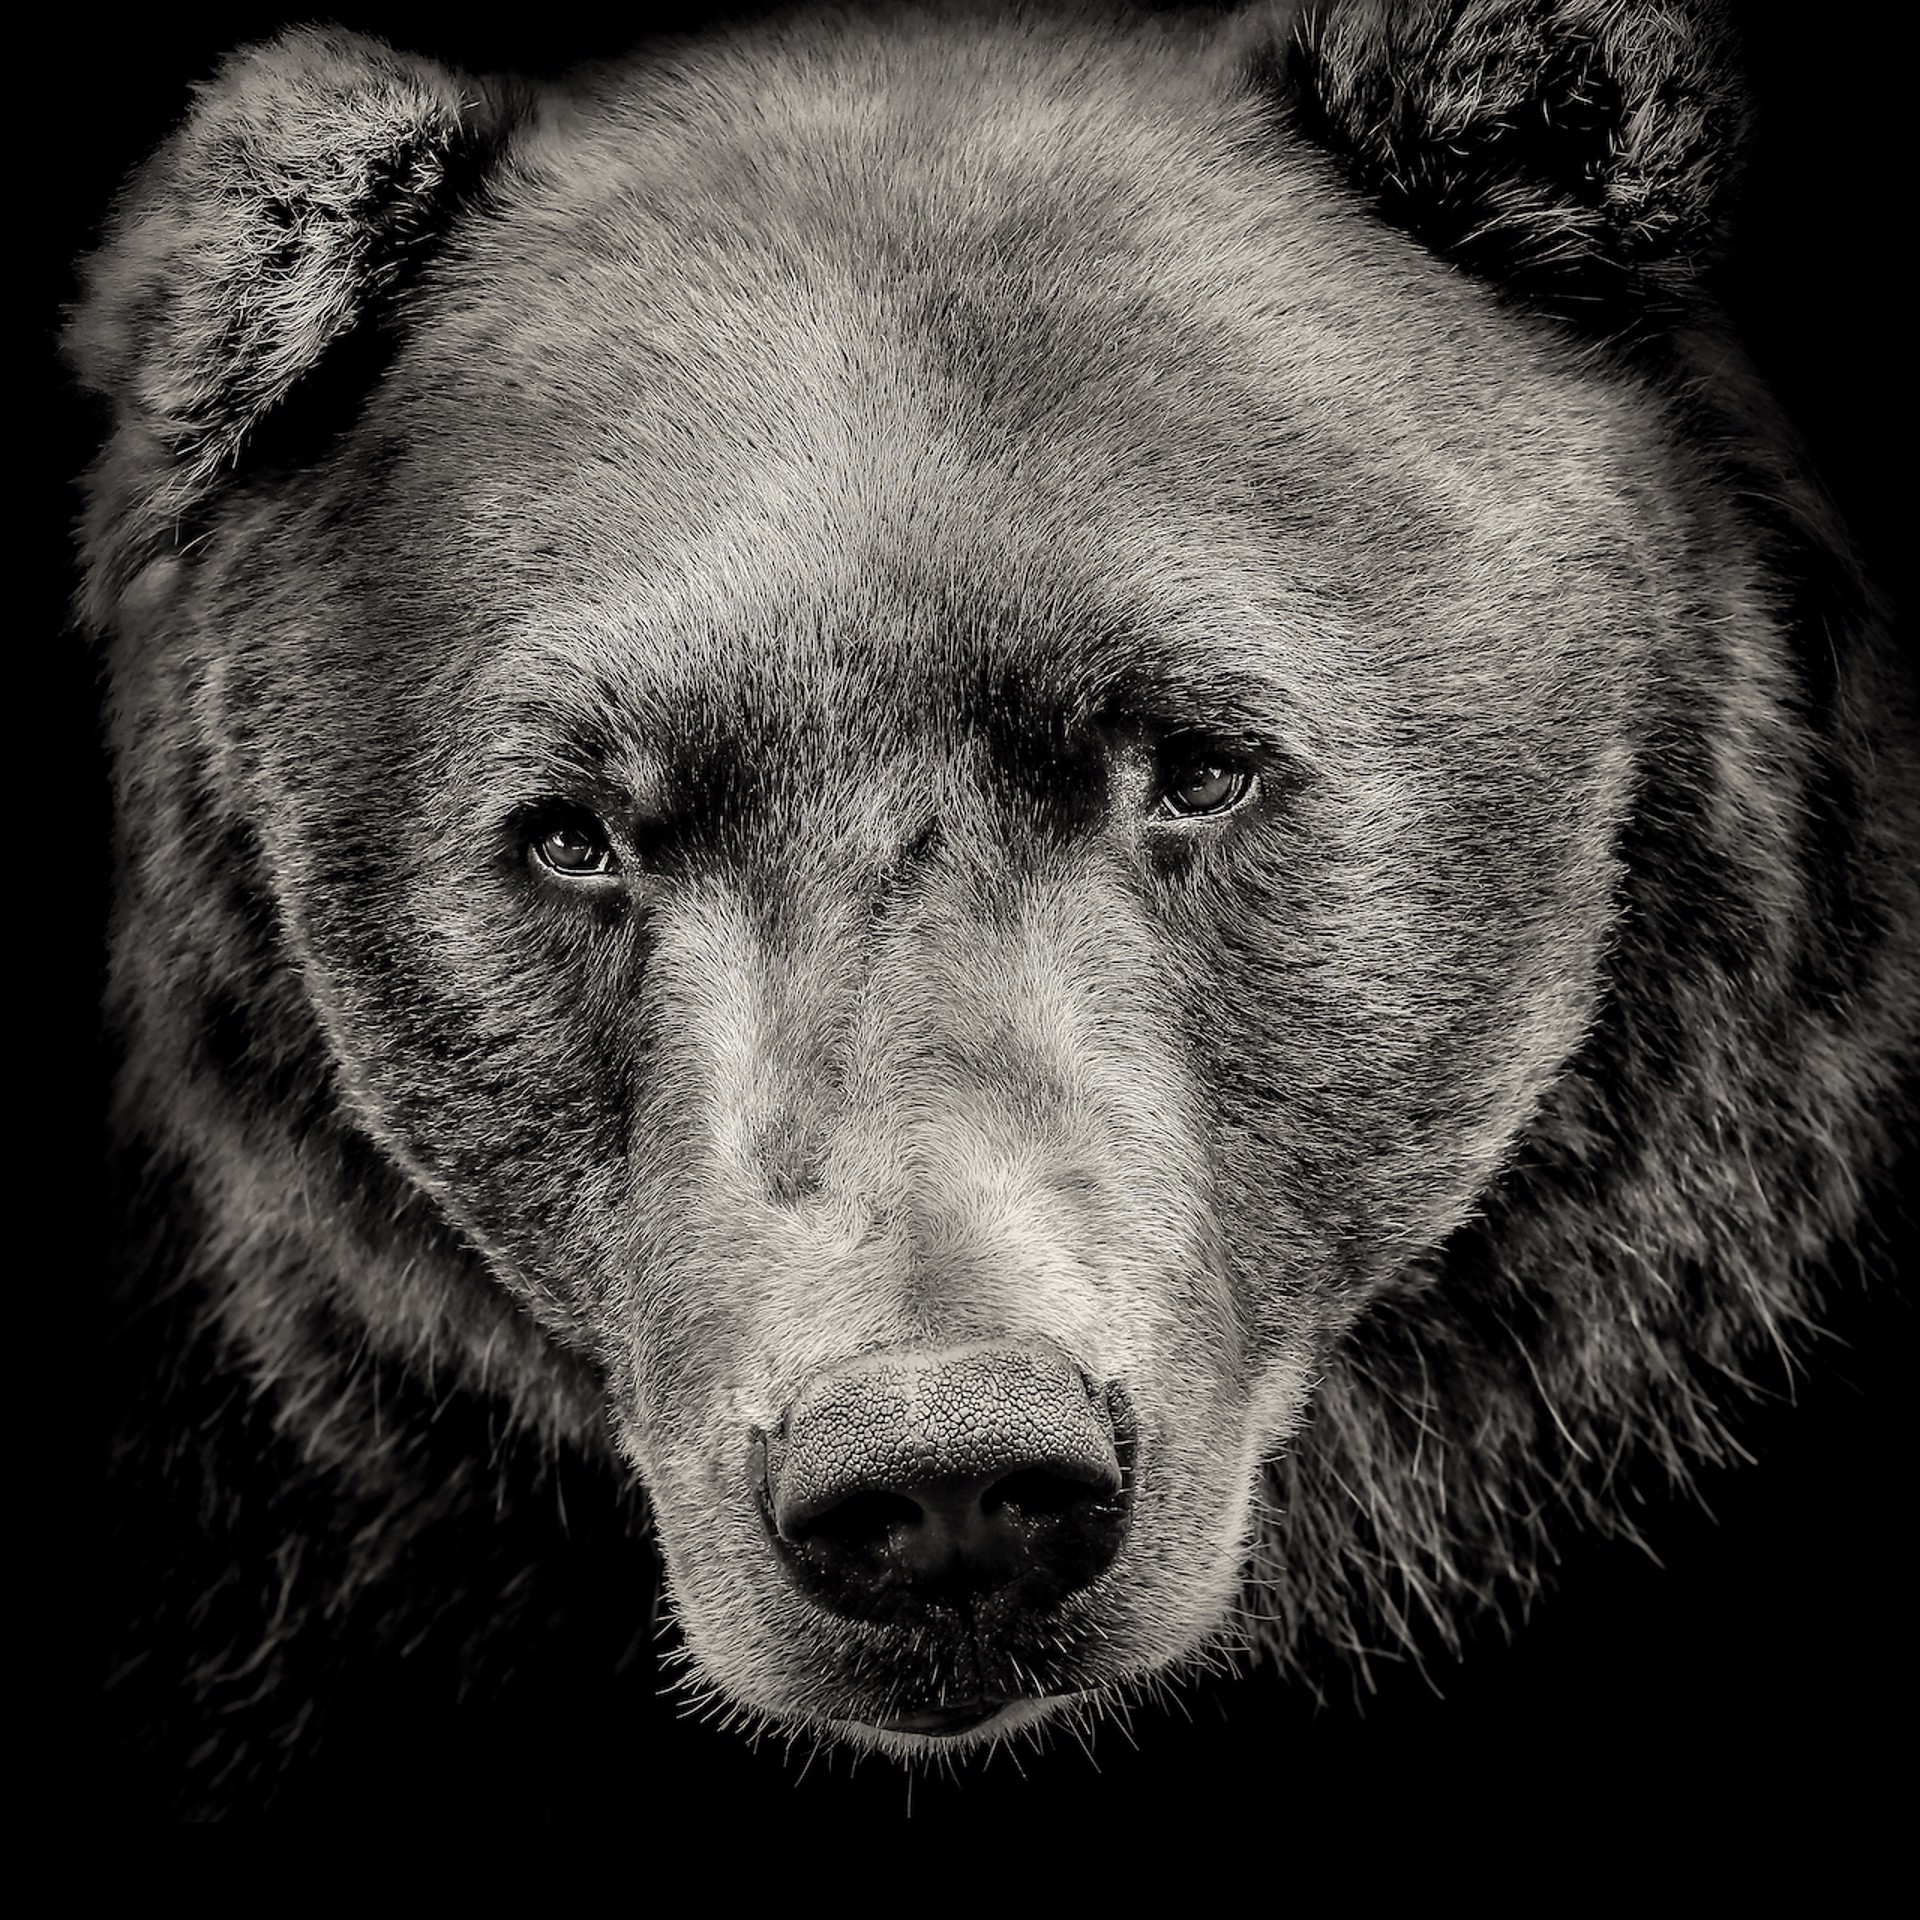 Portrait of Grizzly Bear by Lauren Chambers